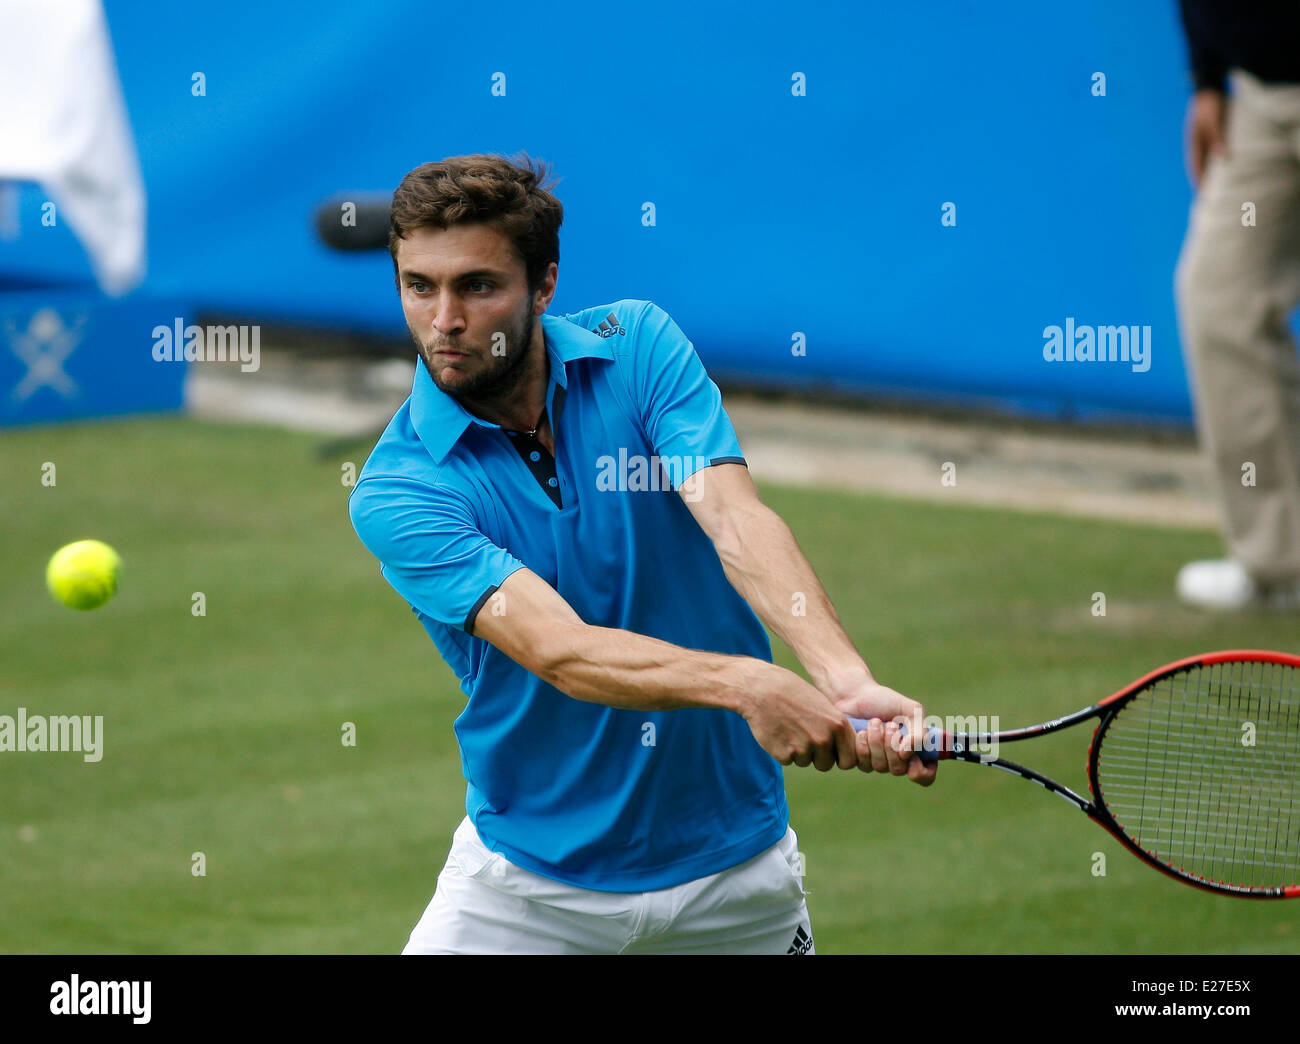 Eastbourne, UK. 16th June, 2014. Aegon International Giles Simon (FRA) defeats Chris Guccione (AUS) by a score 7-6, 6-4 in their1st Round match by a score 6-3, 7-6 at Devonshire Park. Credit:  Action Plus Sports/Alamy Live News Stock Photo